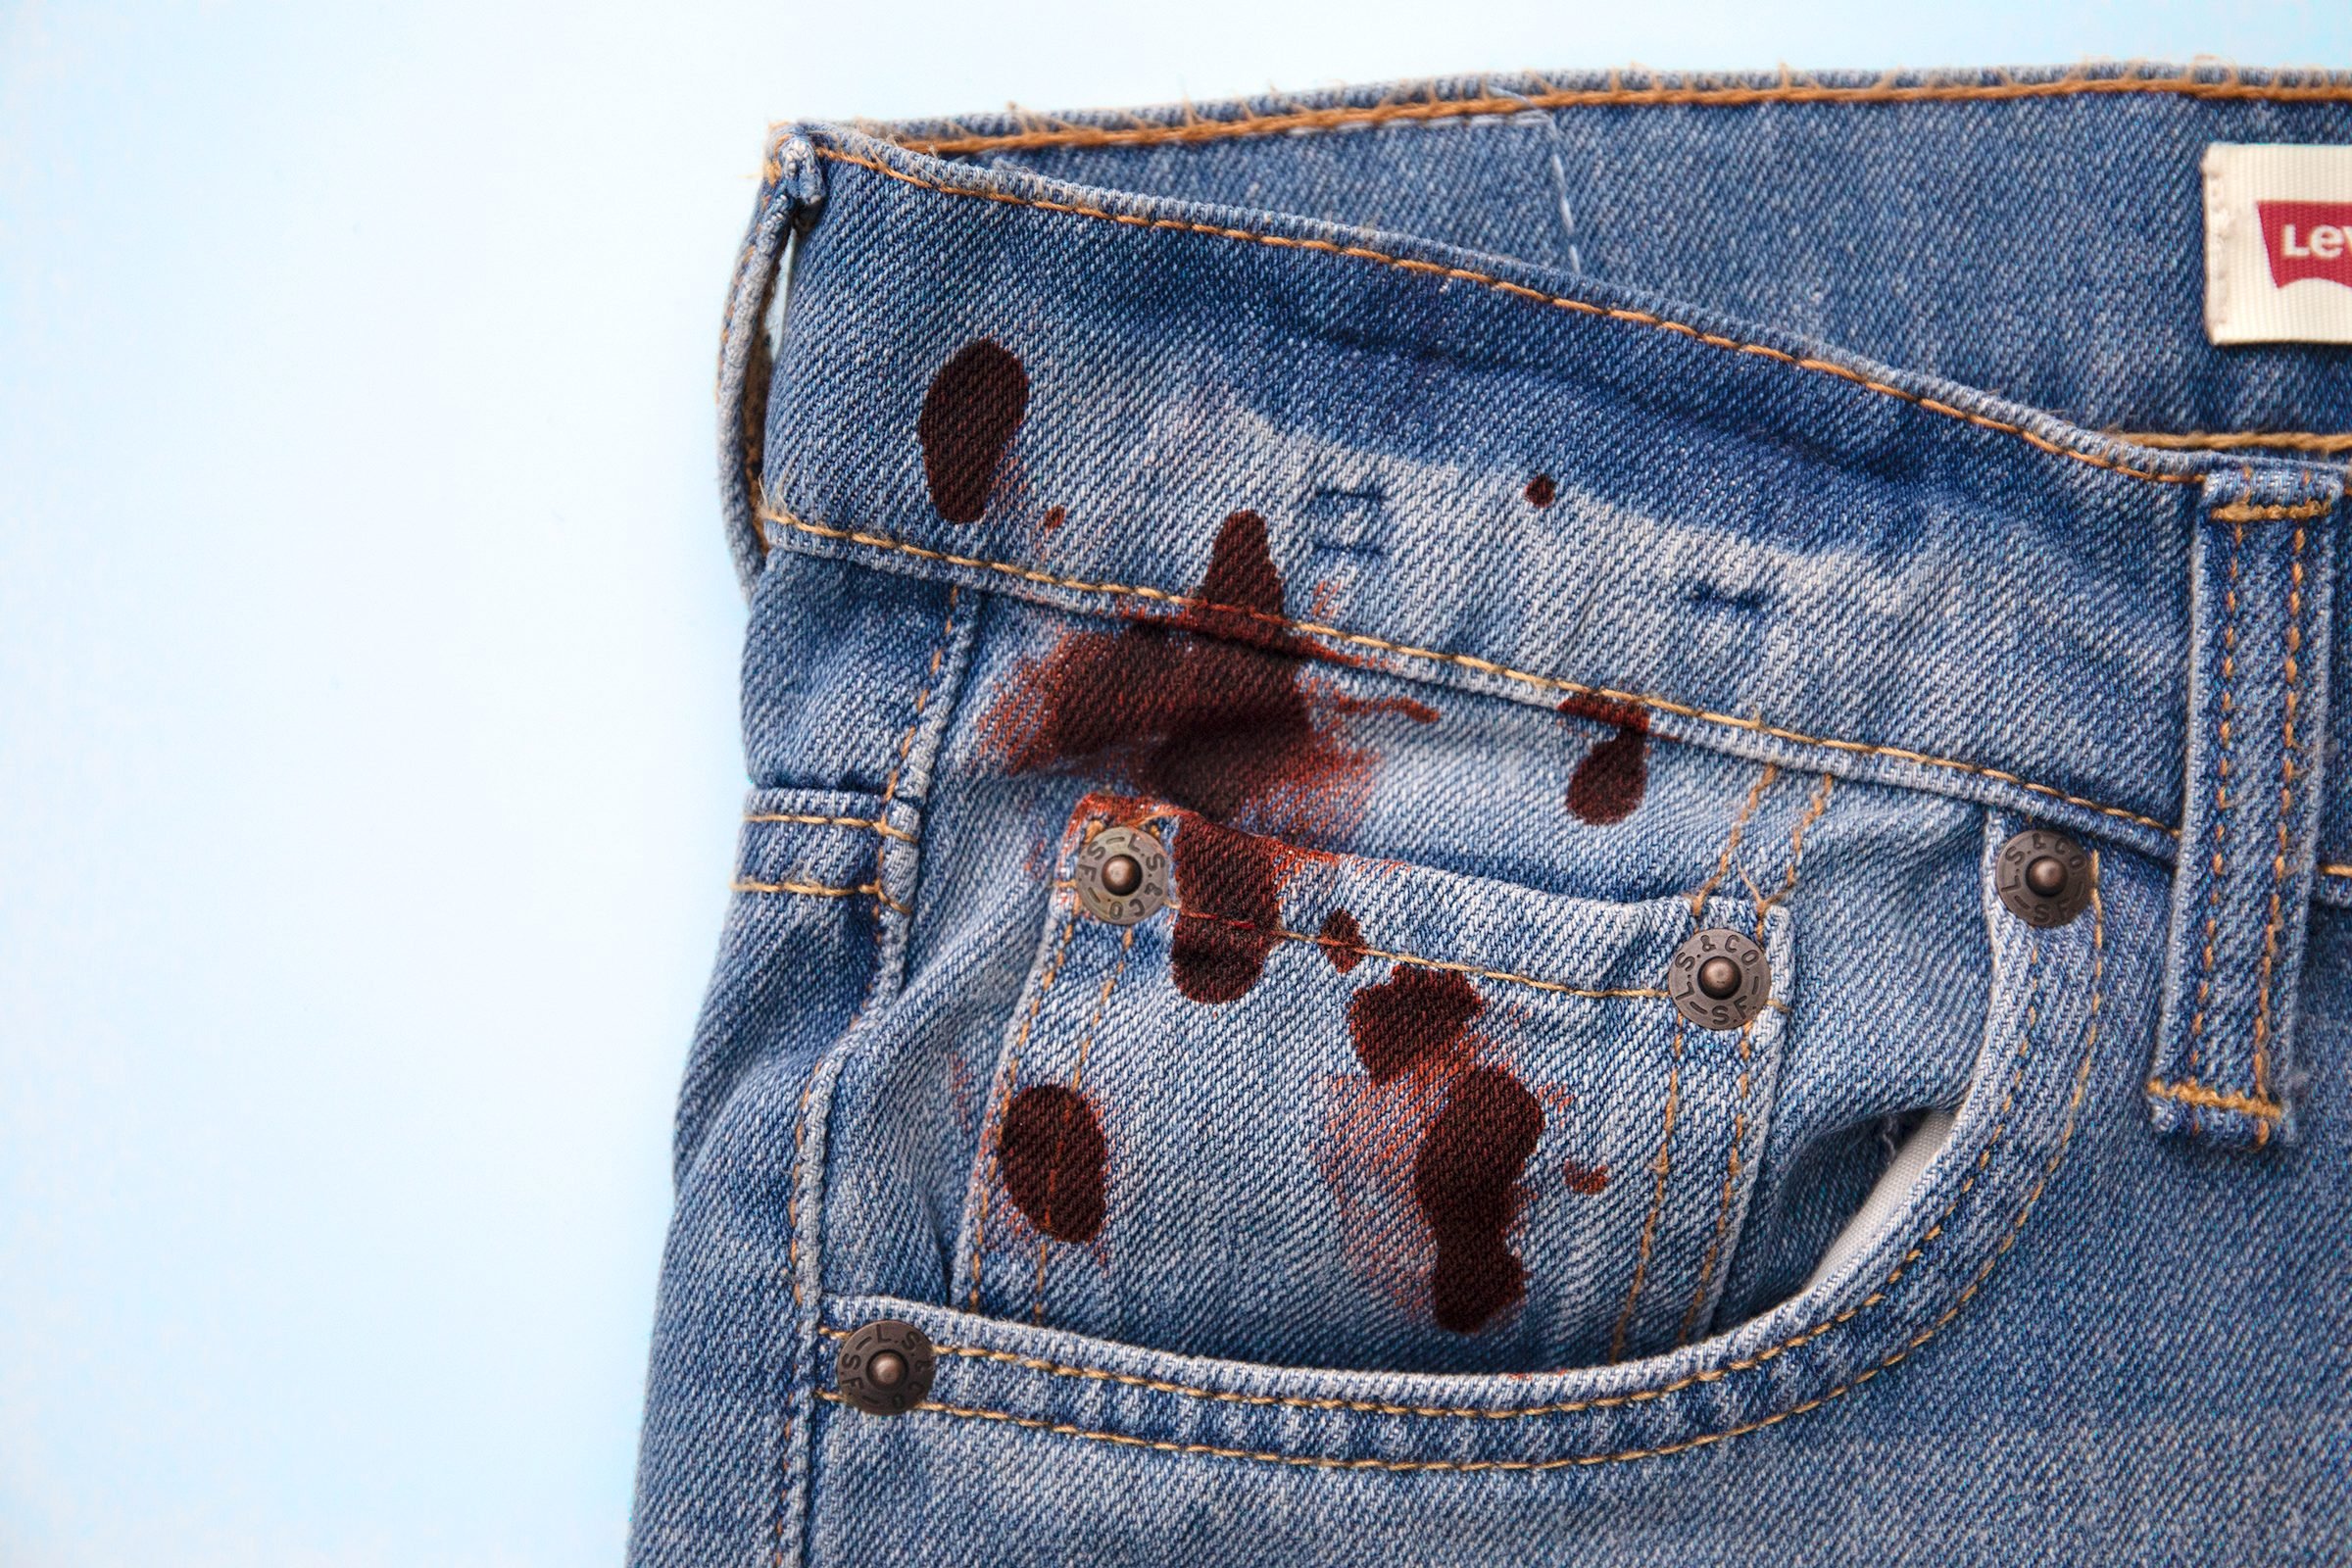 How to Remove Blood Stains from clothing